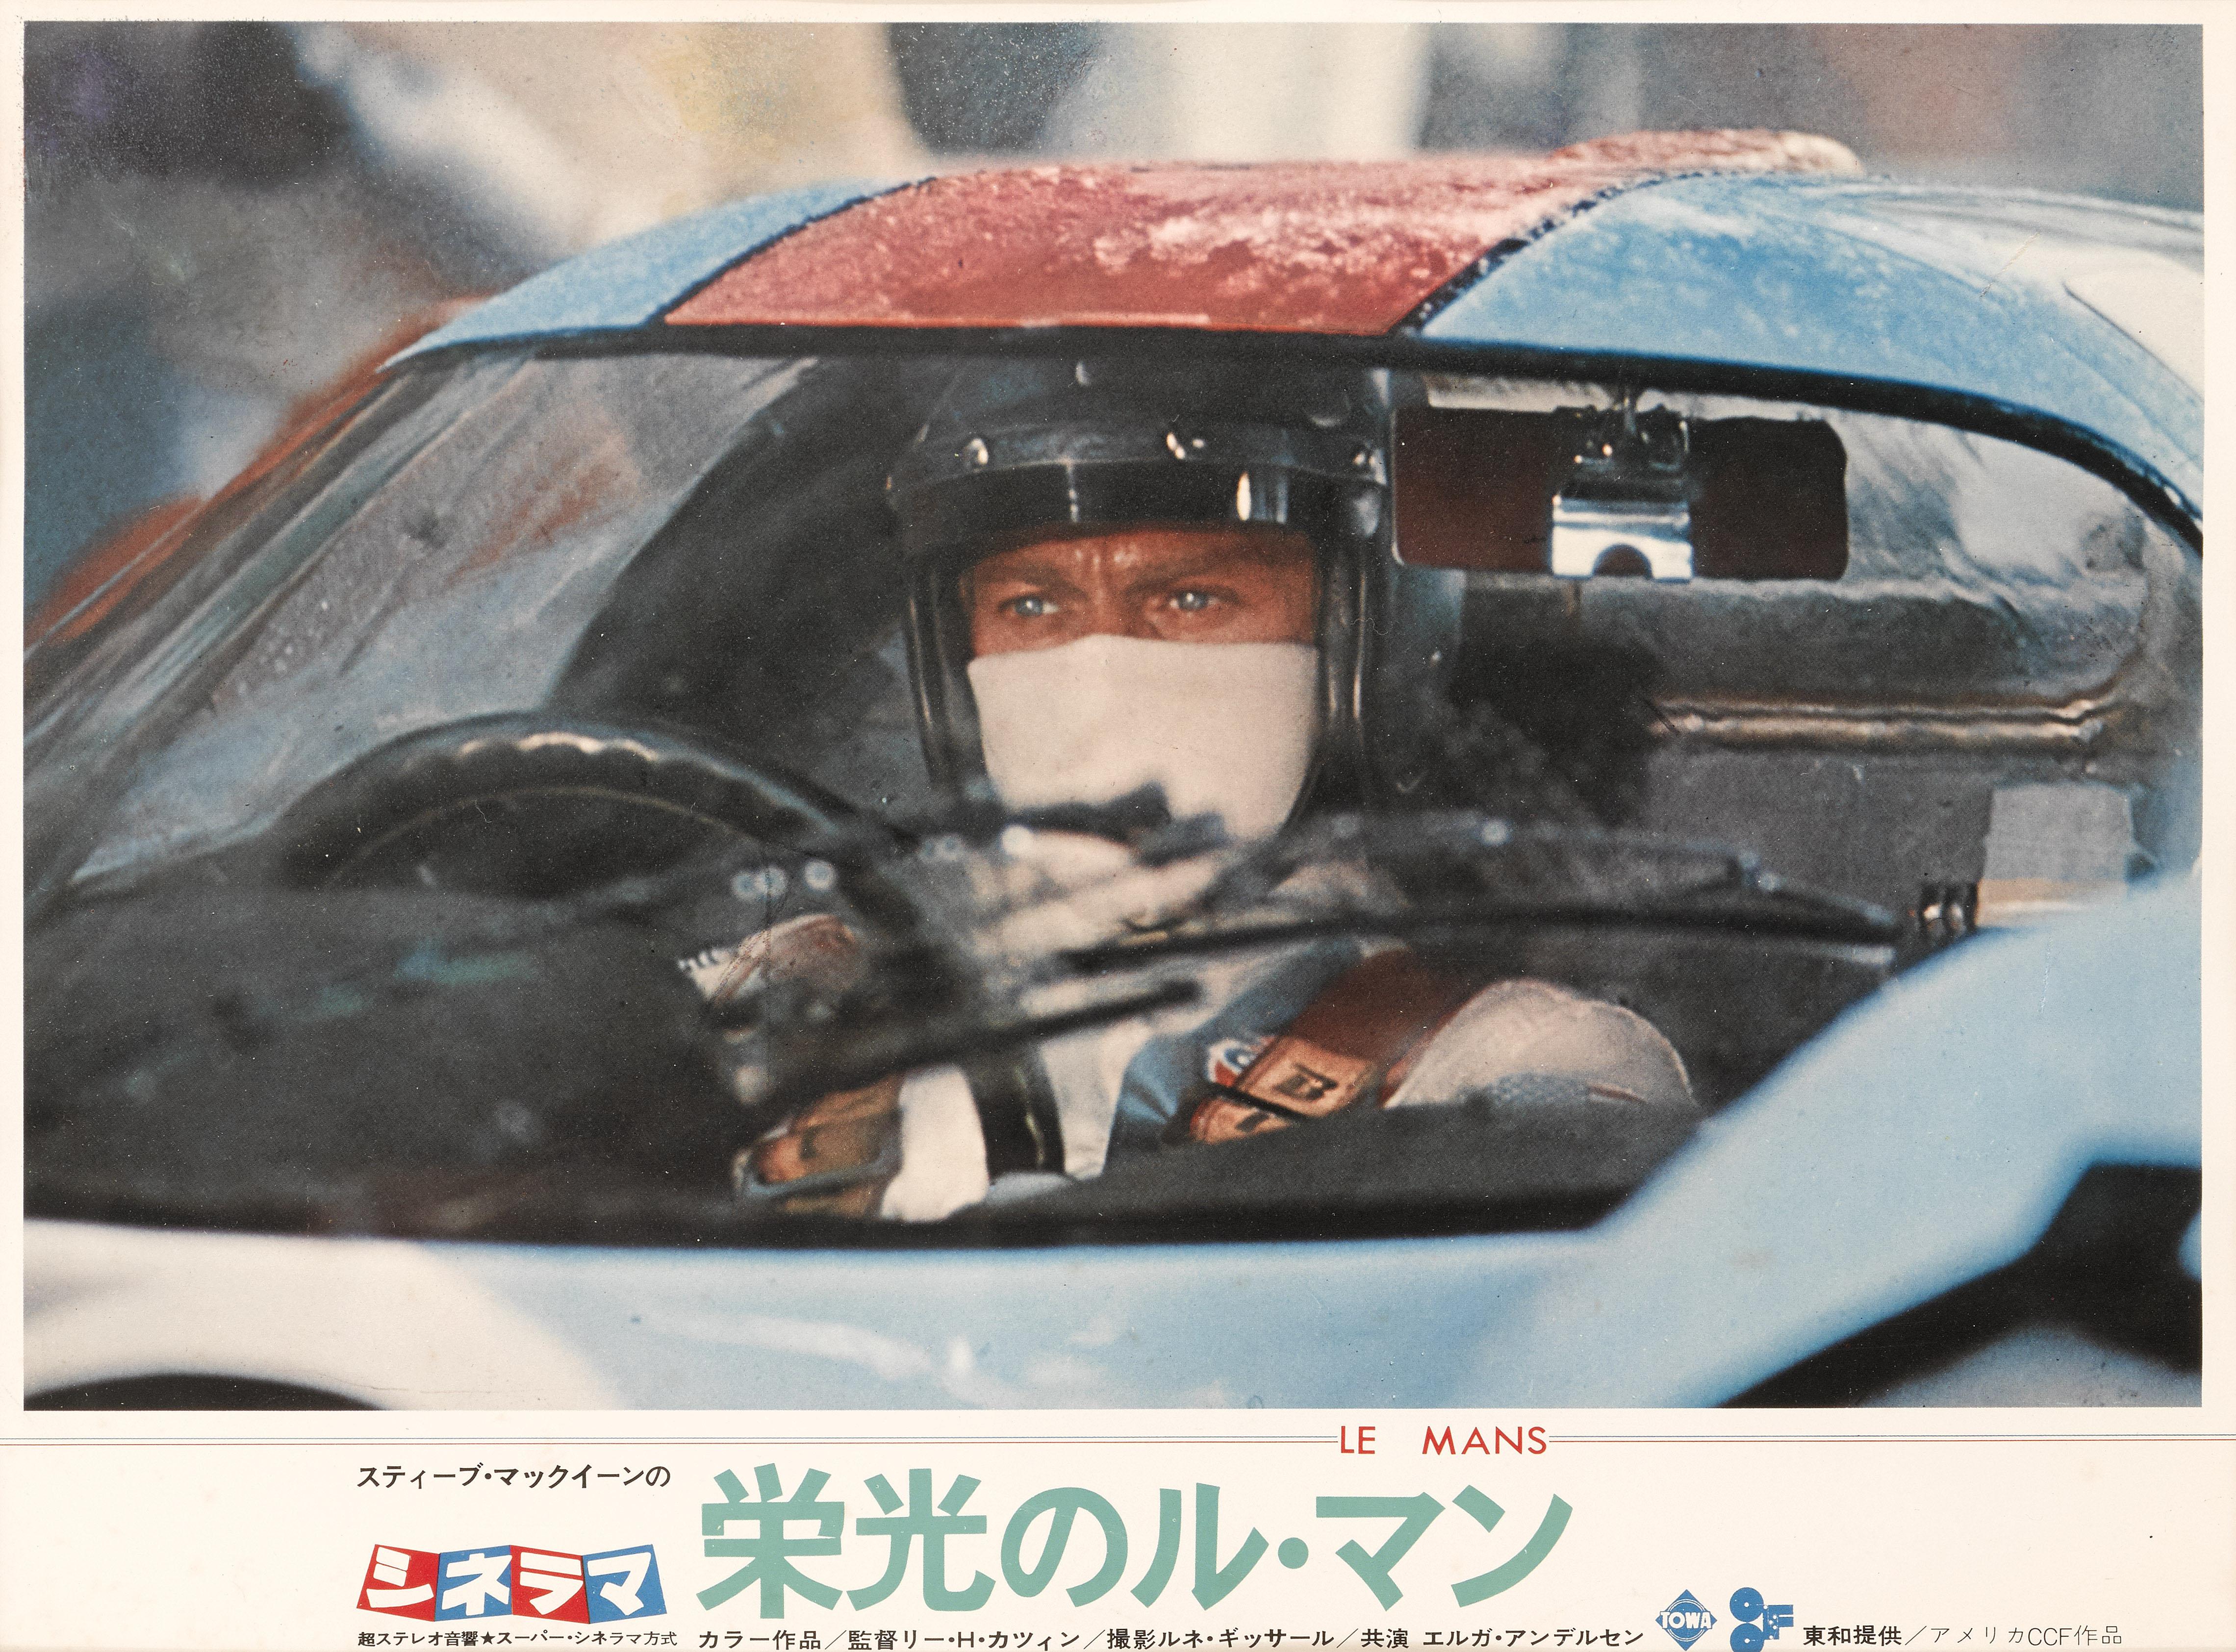 Original Japanese Lobby card for Steve McQueen's 1971 film Le Mans. 
This card shows Steve McQueen in the Porsche 908 K Flunder Spyder which was his personal car.
This film, directed by Lee H. Katzin, portrays the famous Le Mans 24 Hour endurance